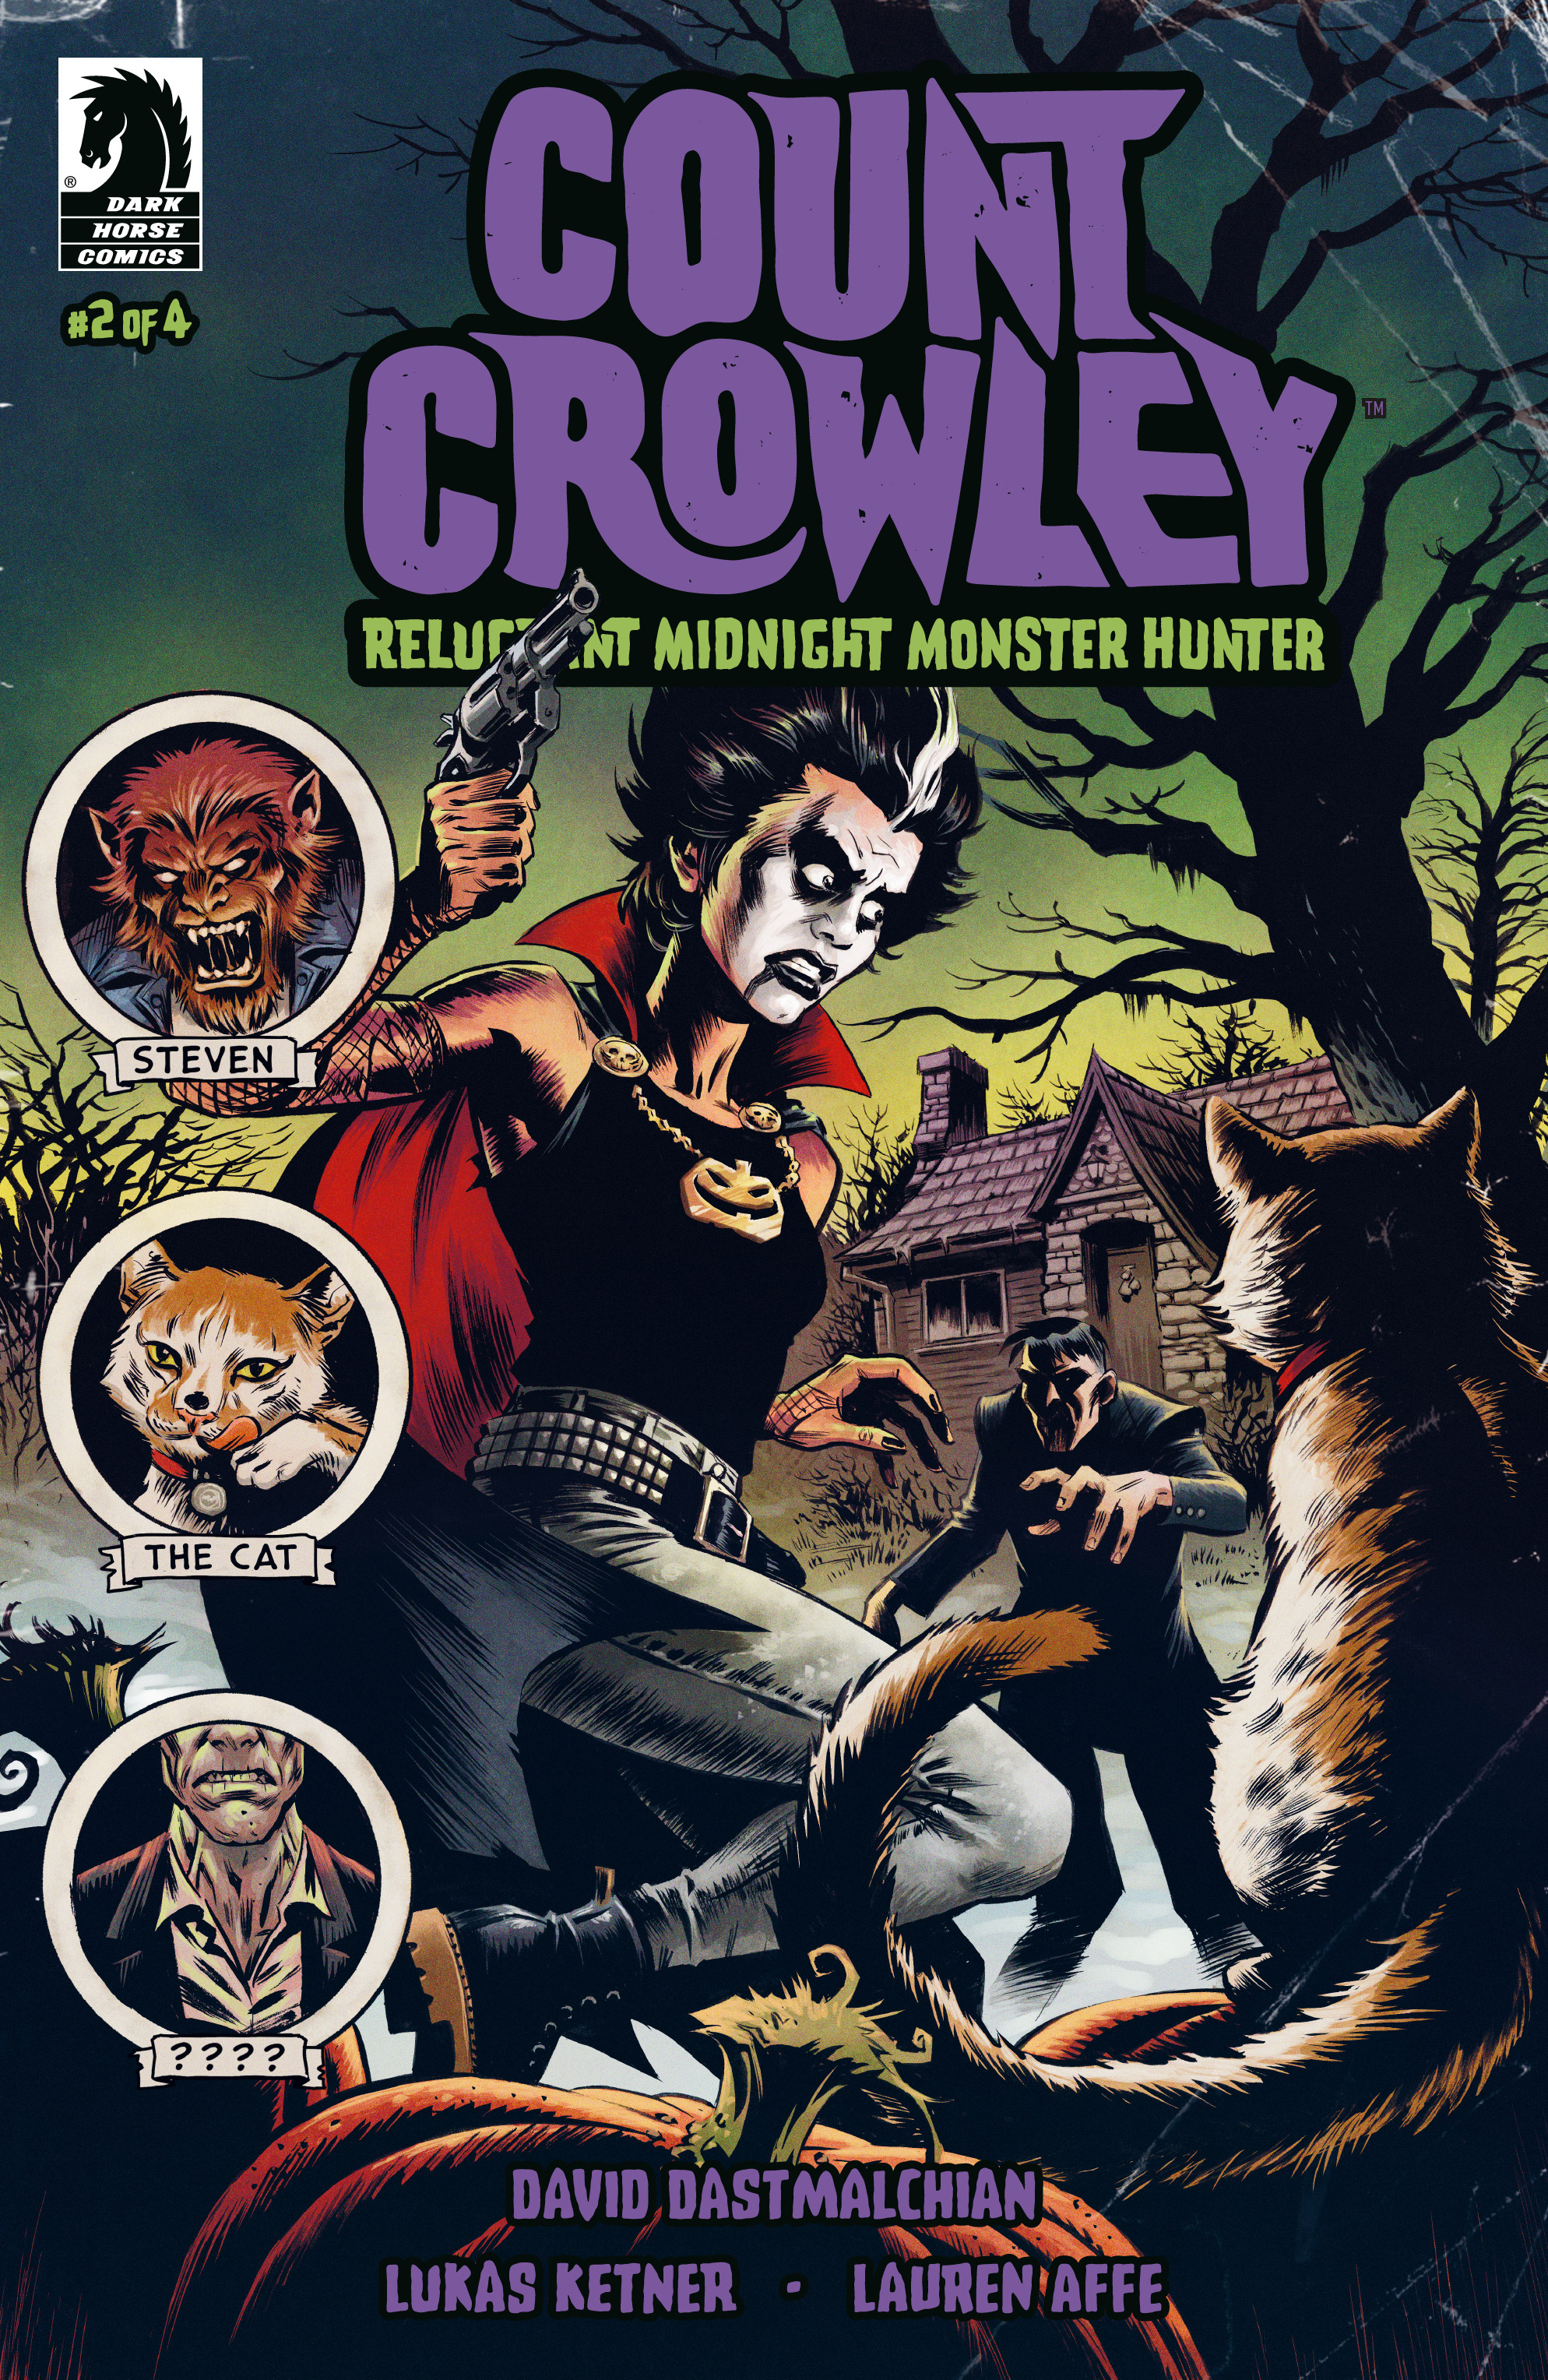 Read online Count Crowley: Reluctant Midnight Monster Hunter comic -  Issue #2 - 1